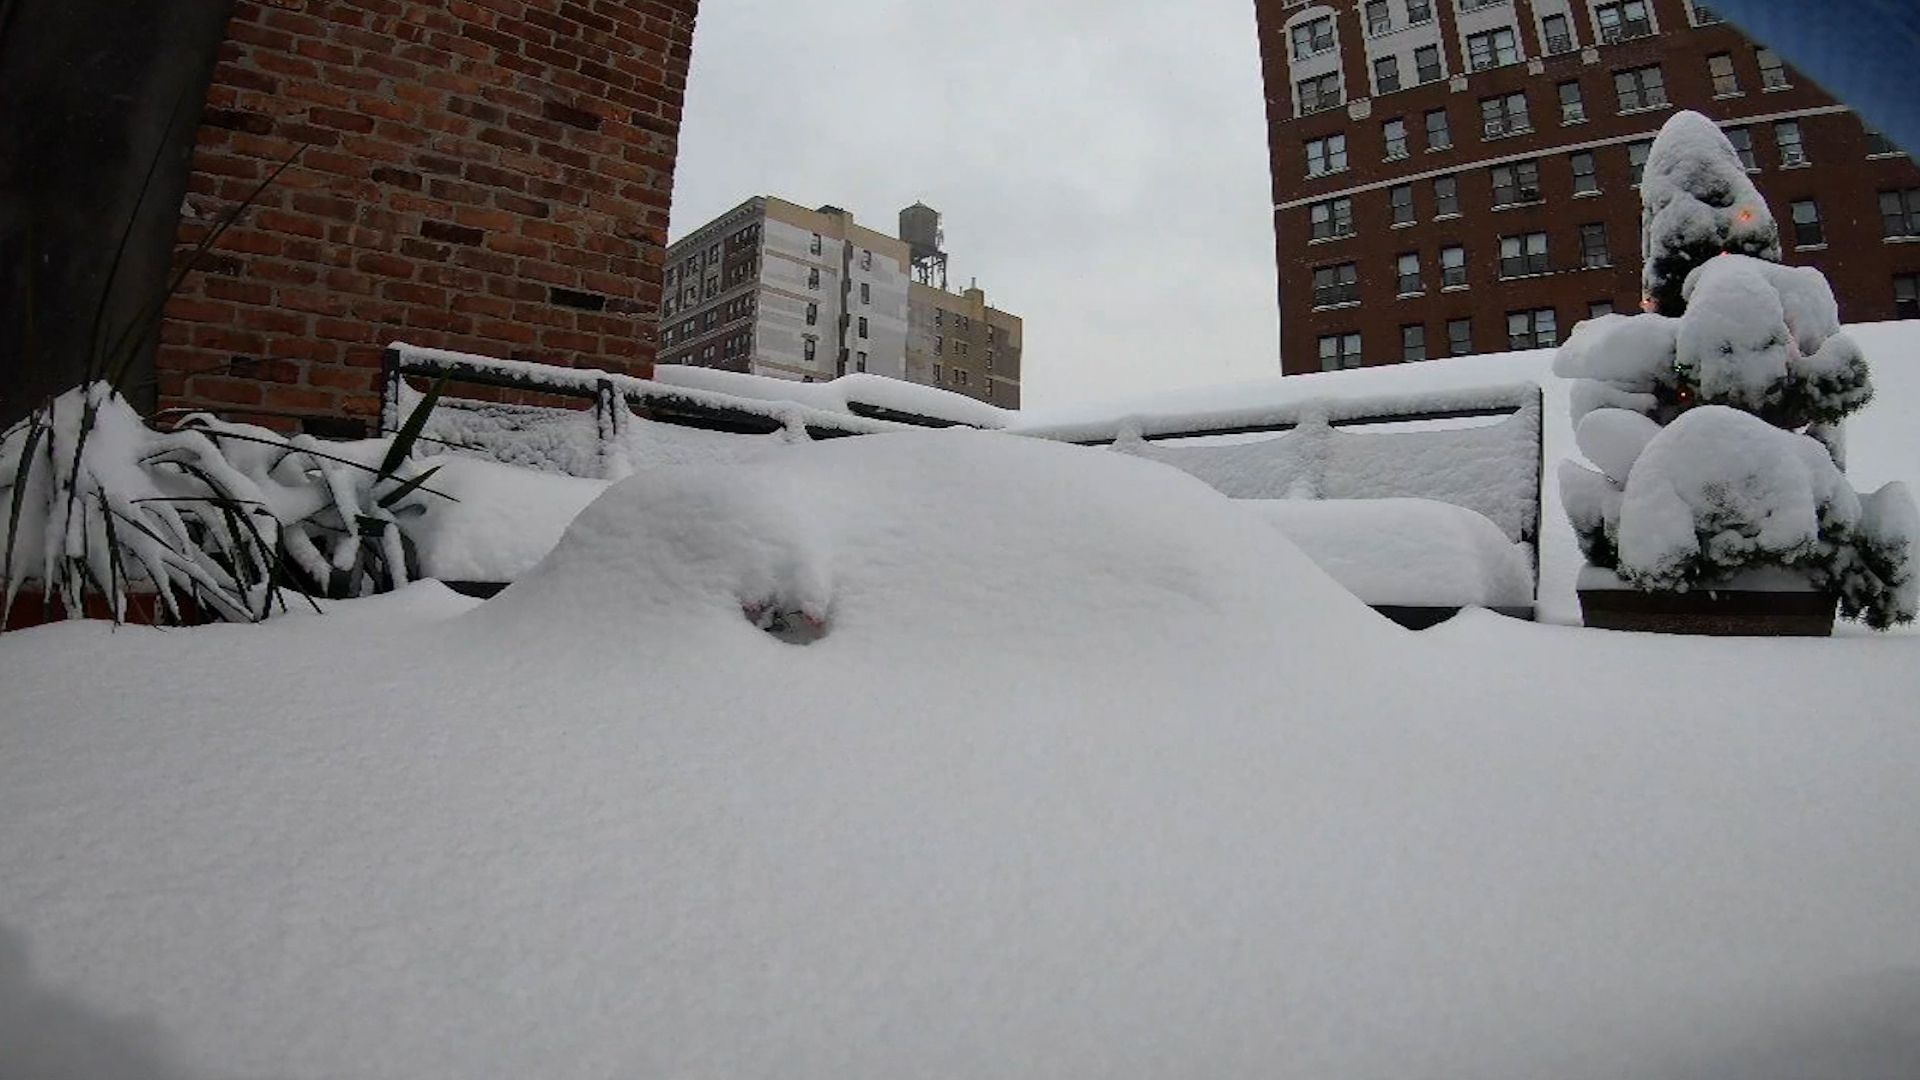 Photos & Videos Show Beauty, Chaos Of Major Snowstorm In Tri State Area New York